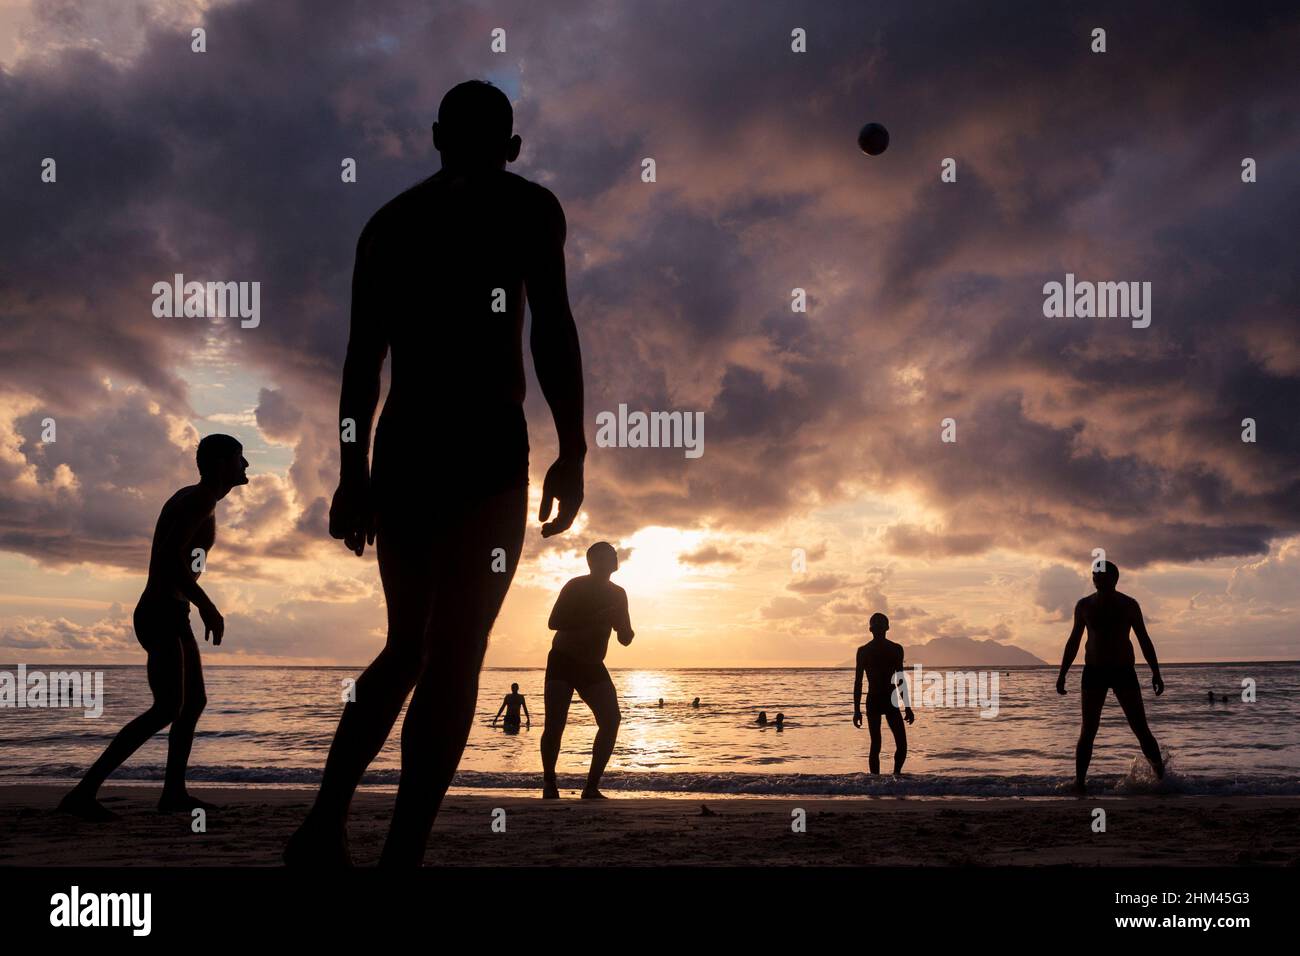 Silhouettes on Beau Vallon Beach playing volleyball at sunset on Mahe Island, Seychelles. Stock Photo